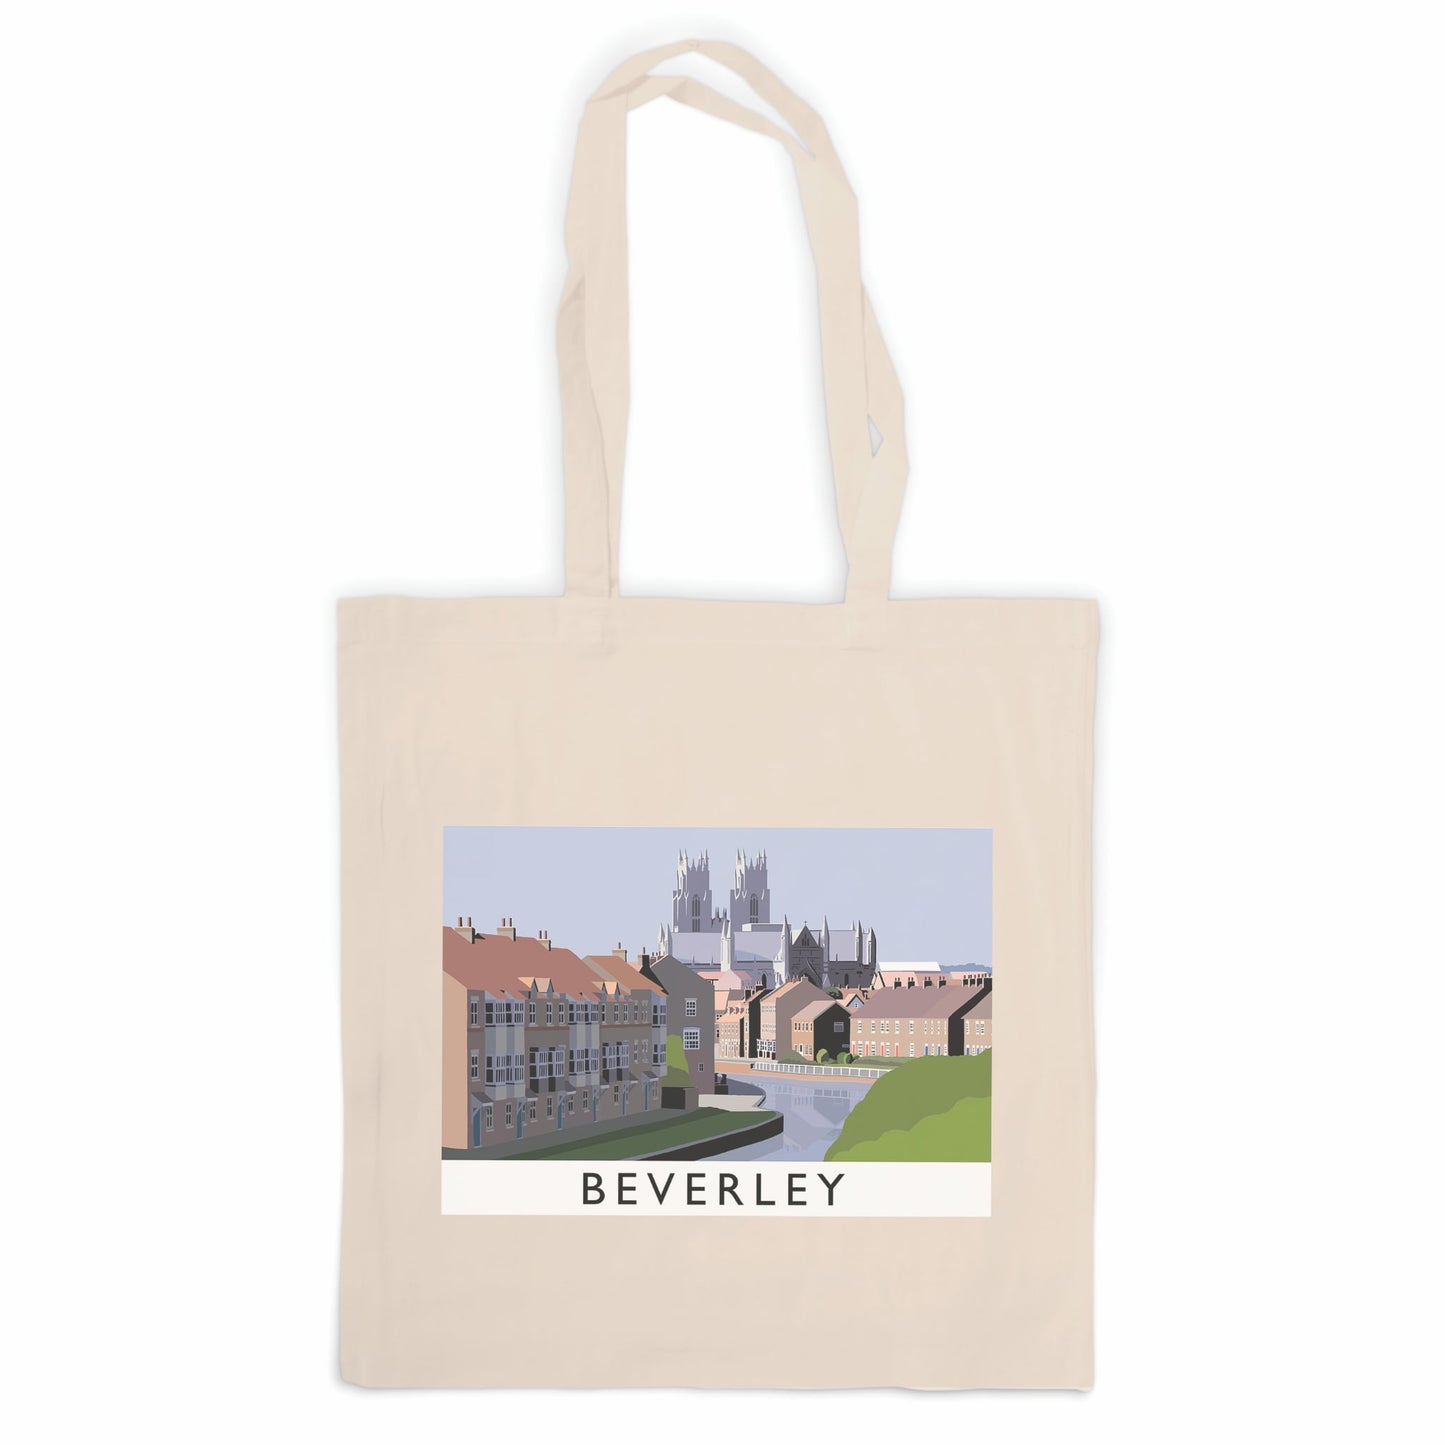 Beverley Tote Bag - The Great Yorkshire Shop